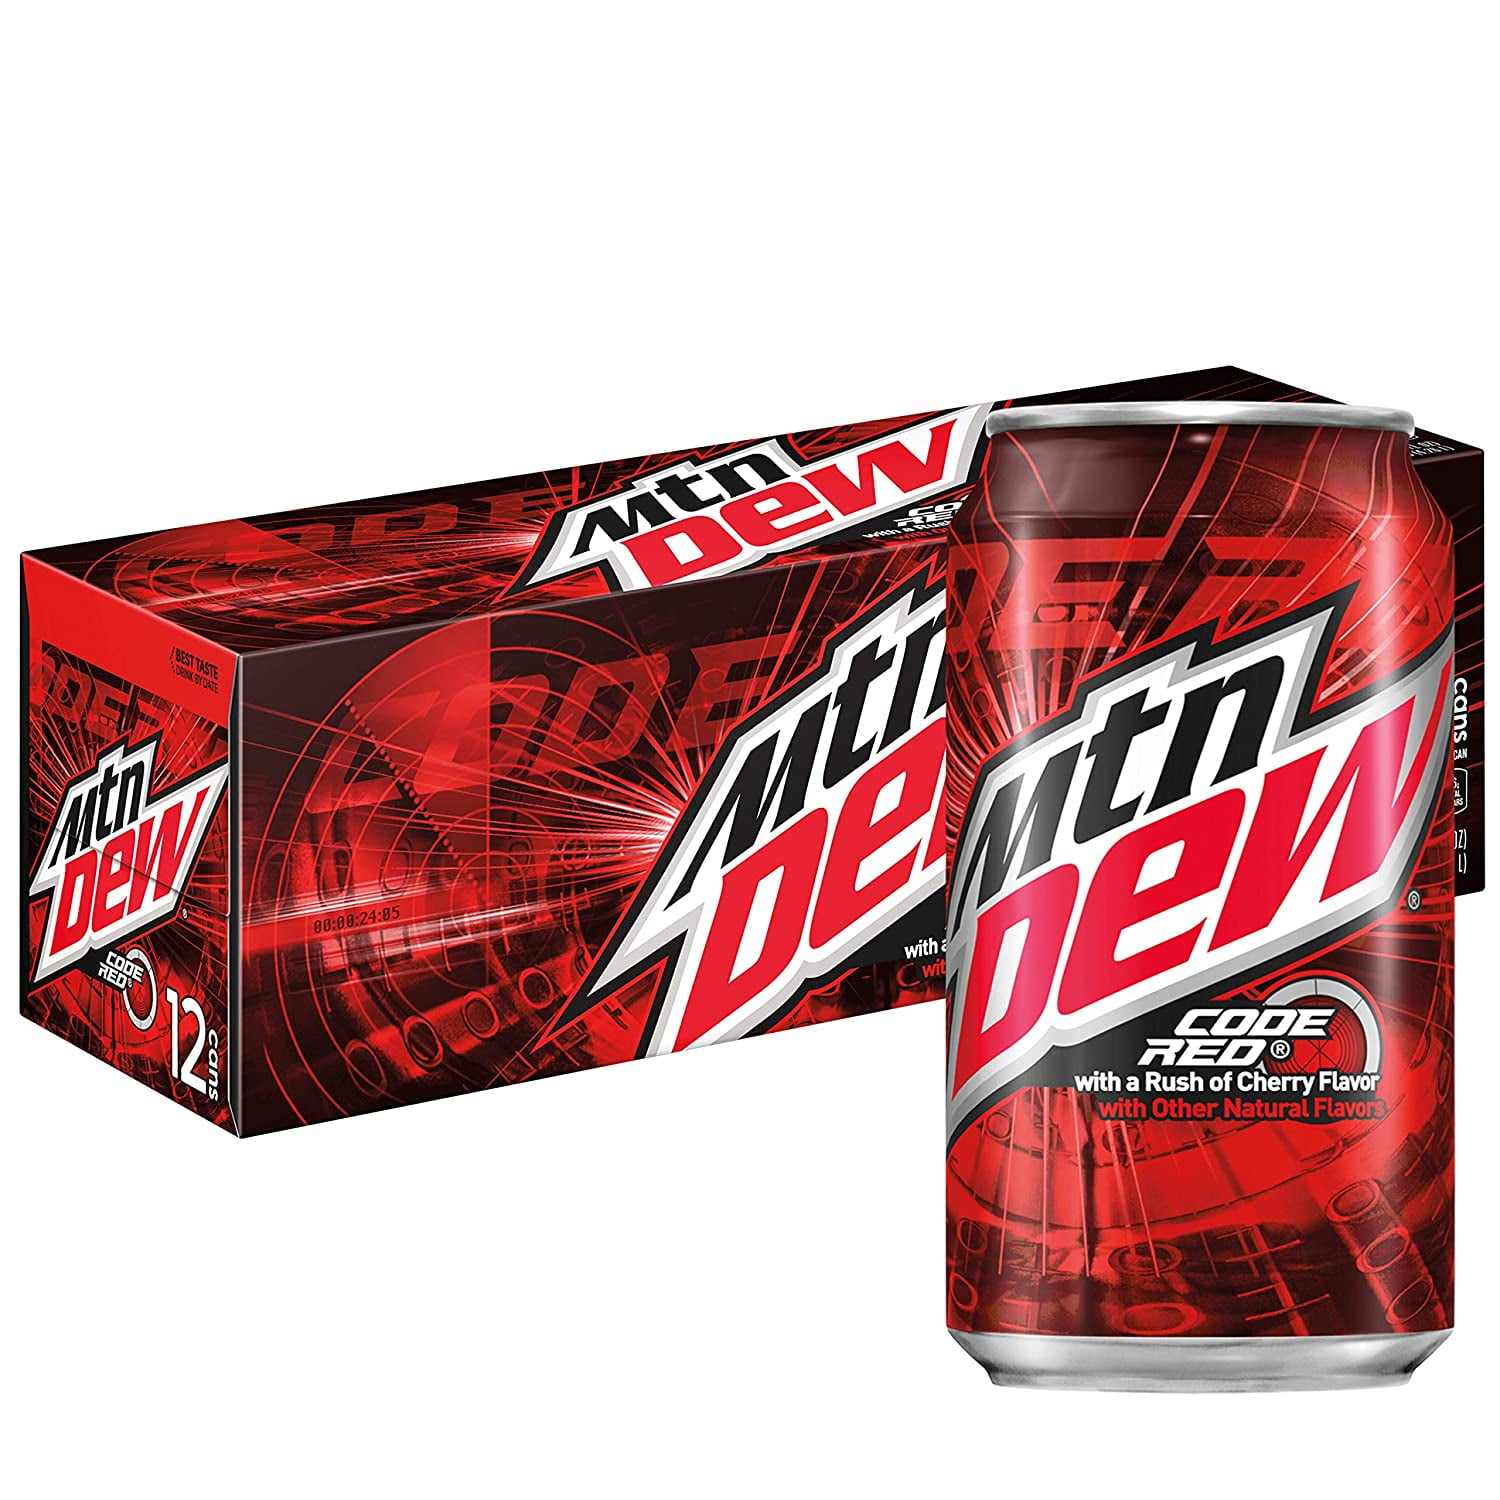 Mountain Dew Code Red Cherry Flavored Soda Pop 12 Fl Oz 12 Pack Cans Walmart Com